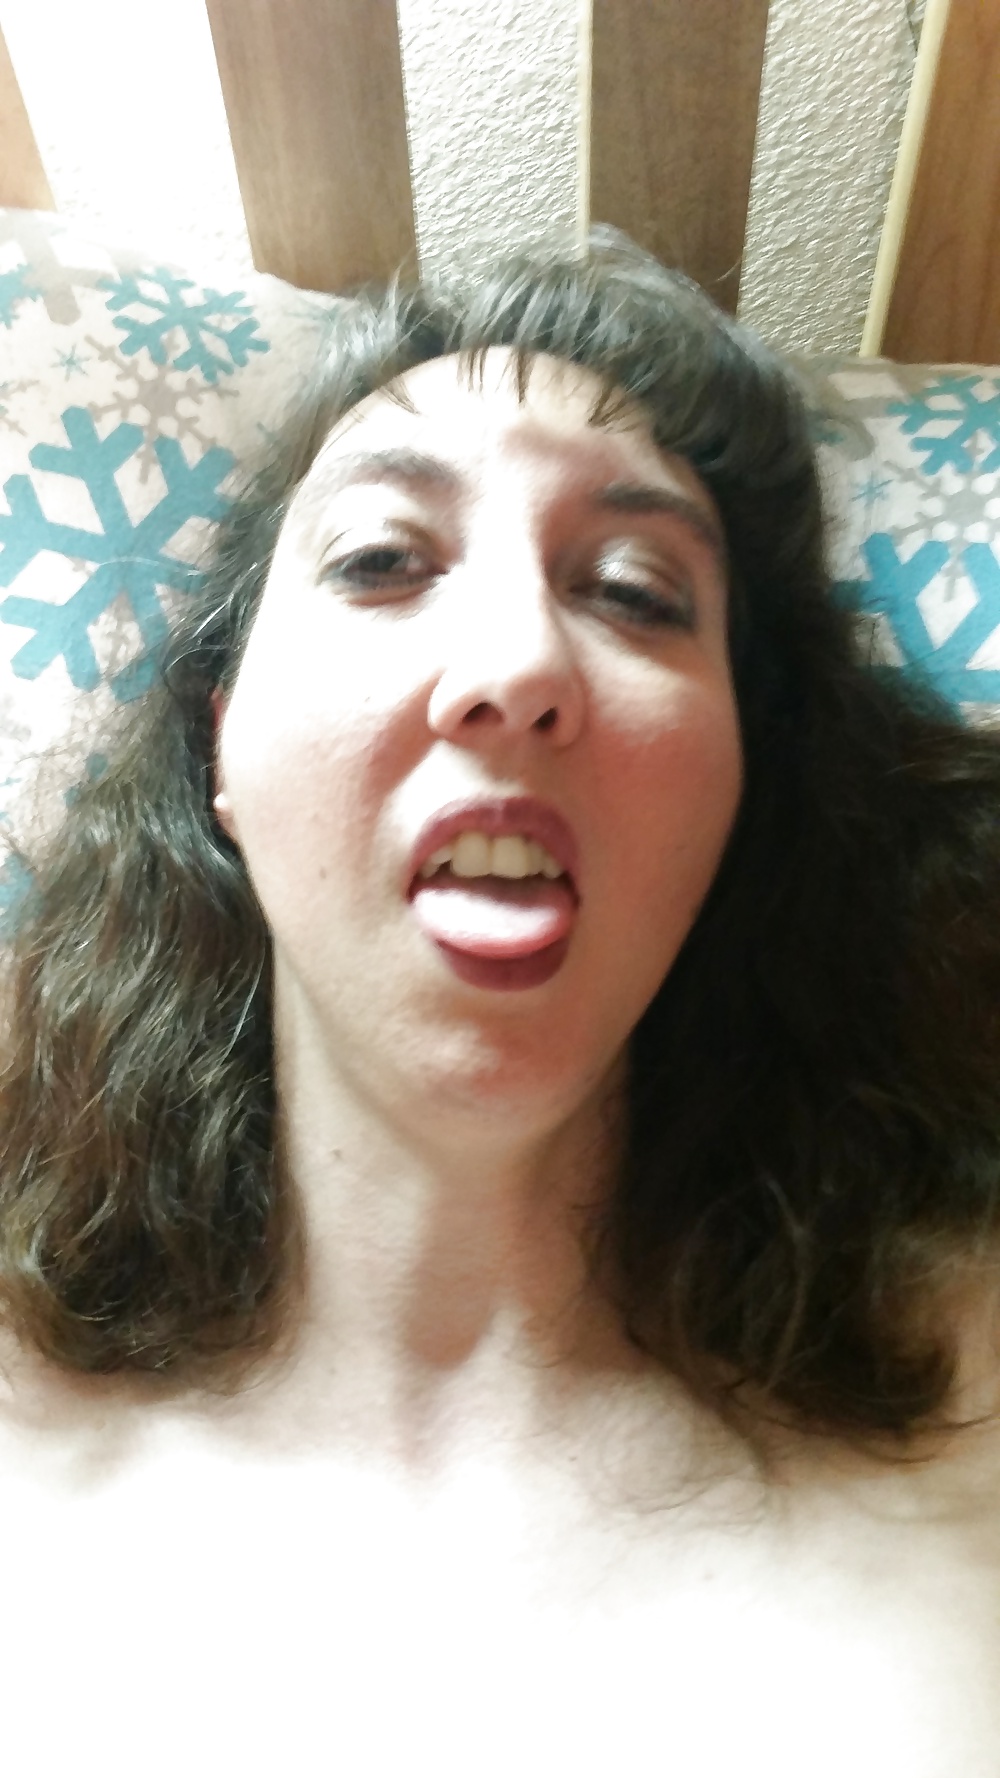 Any guys wanna give my wife a facial she did these pics 4 u. #39324461